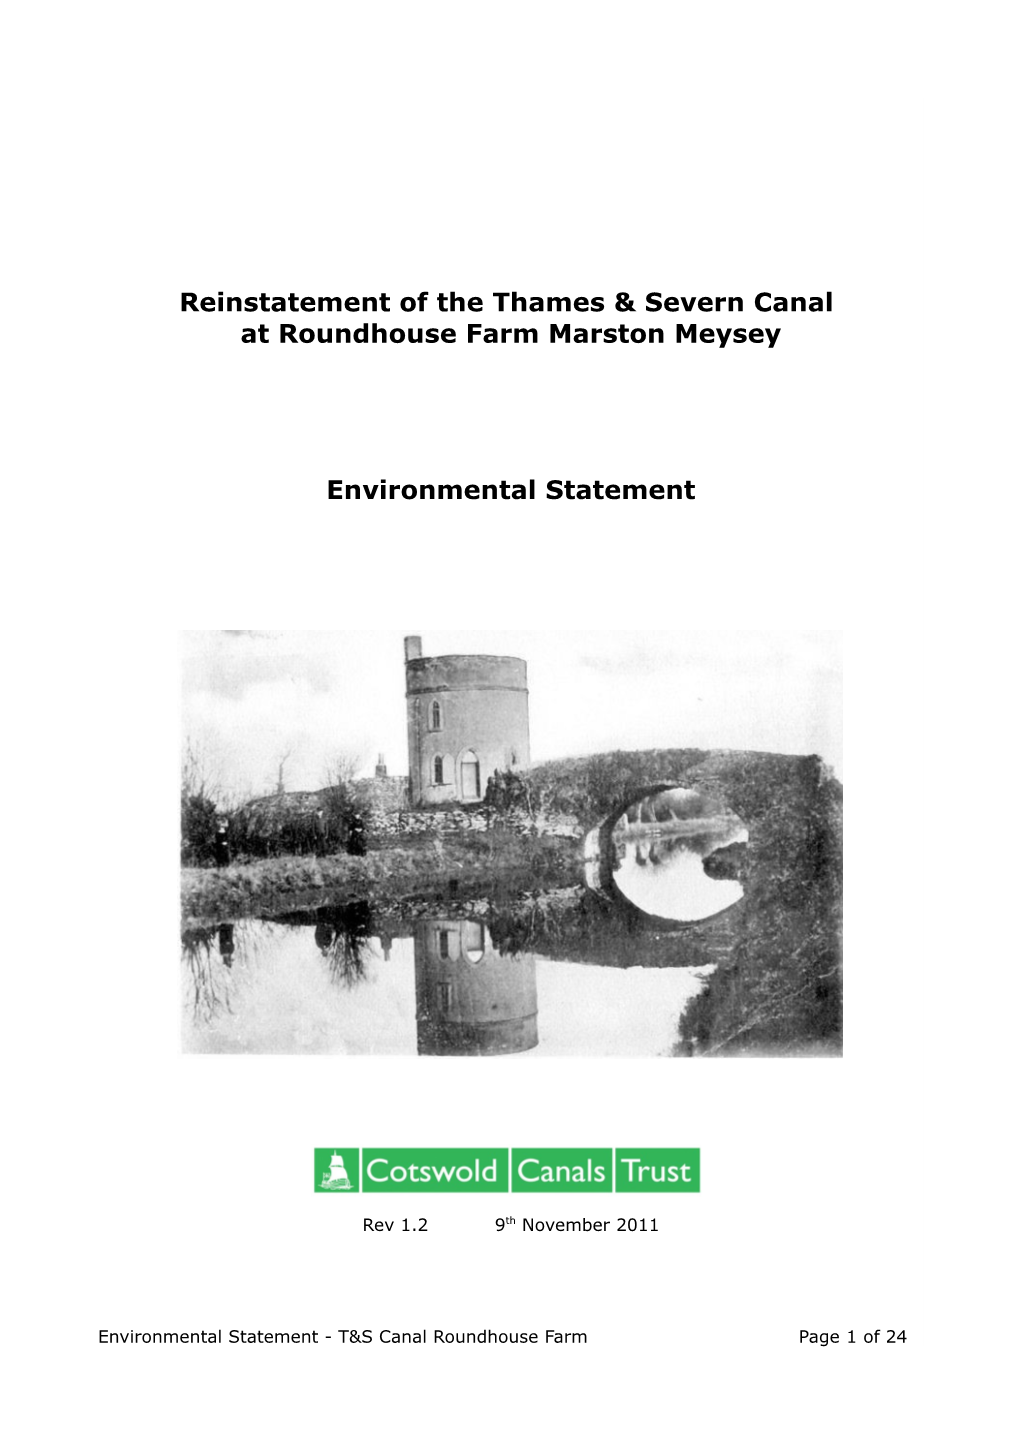 Reinstatement of the Thames & Severn Canal at Roundhouse Farm